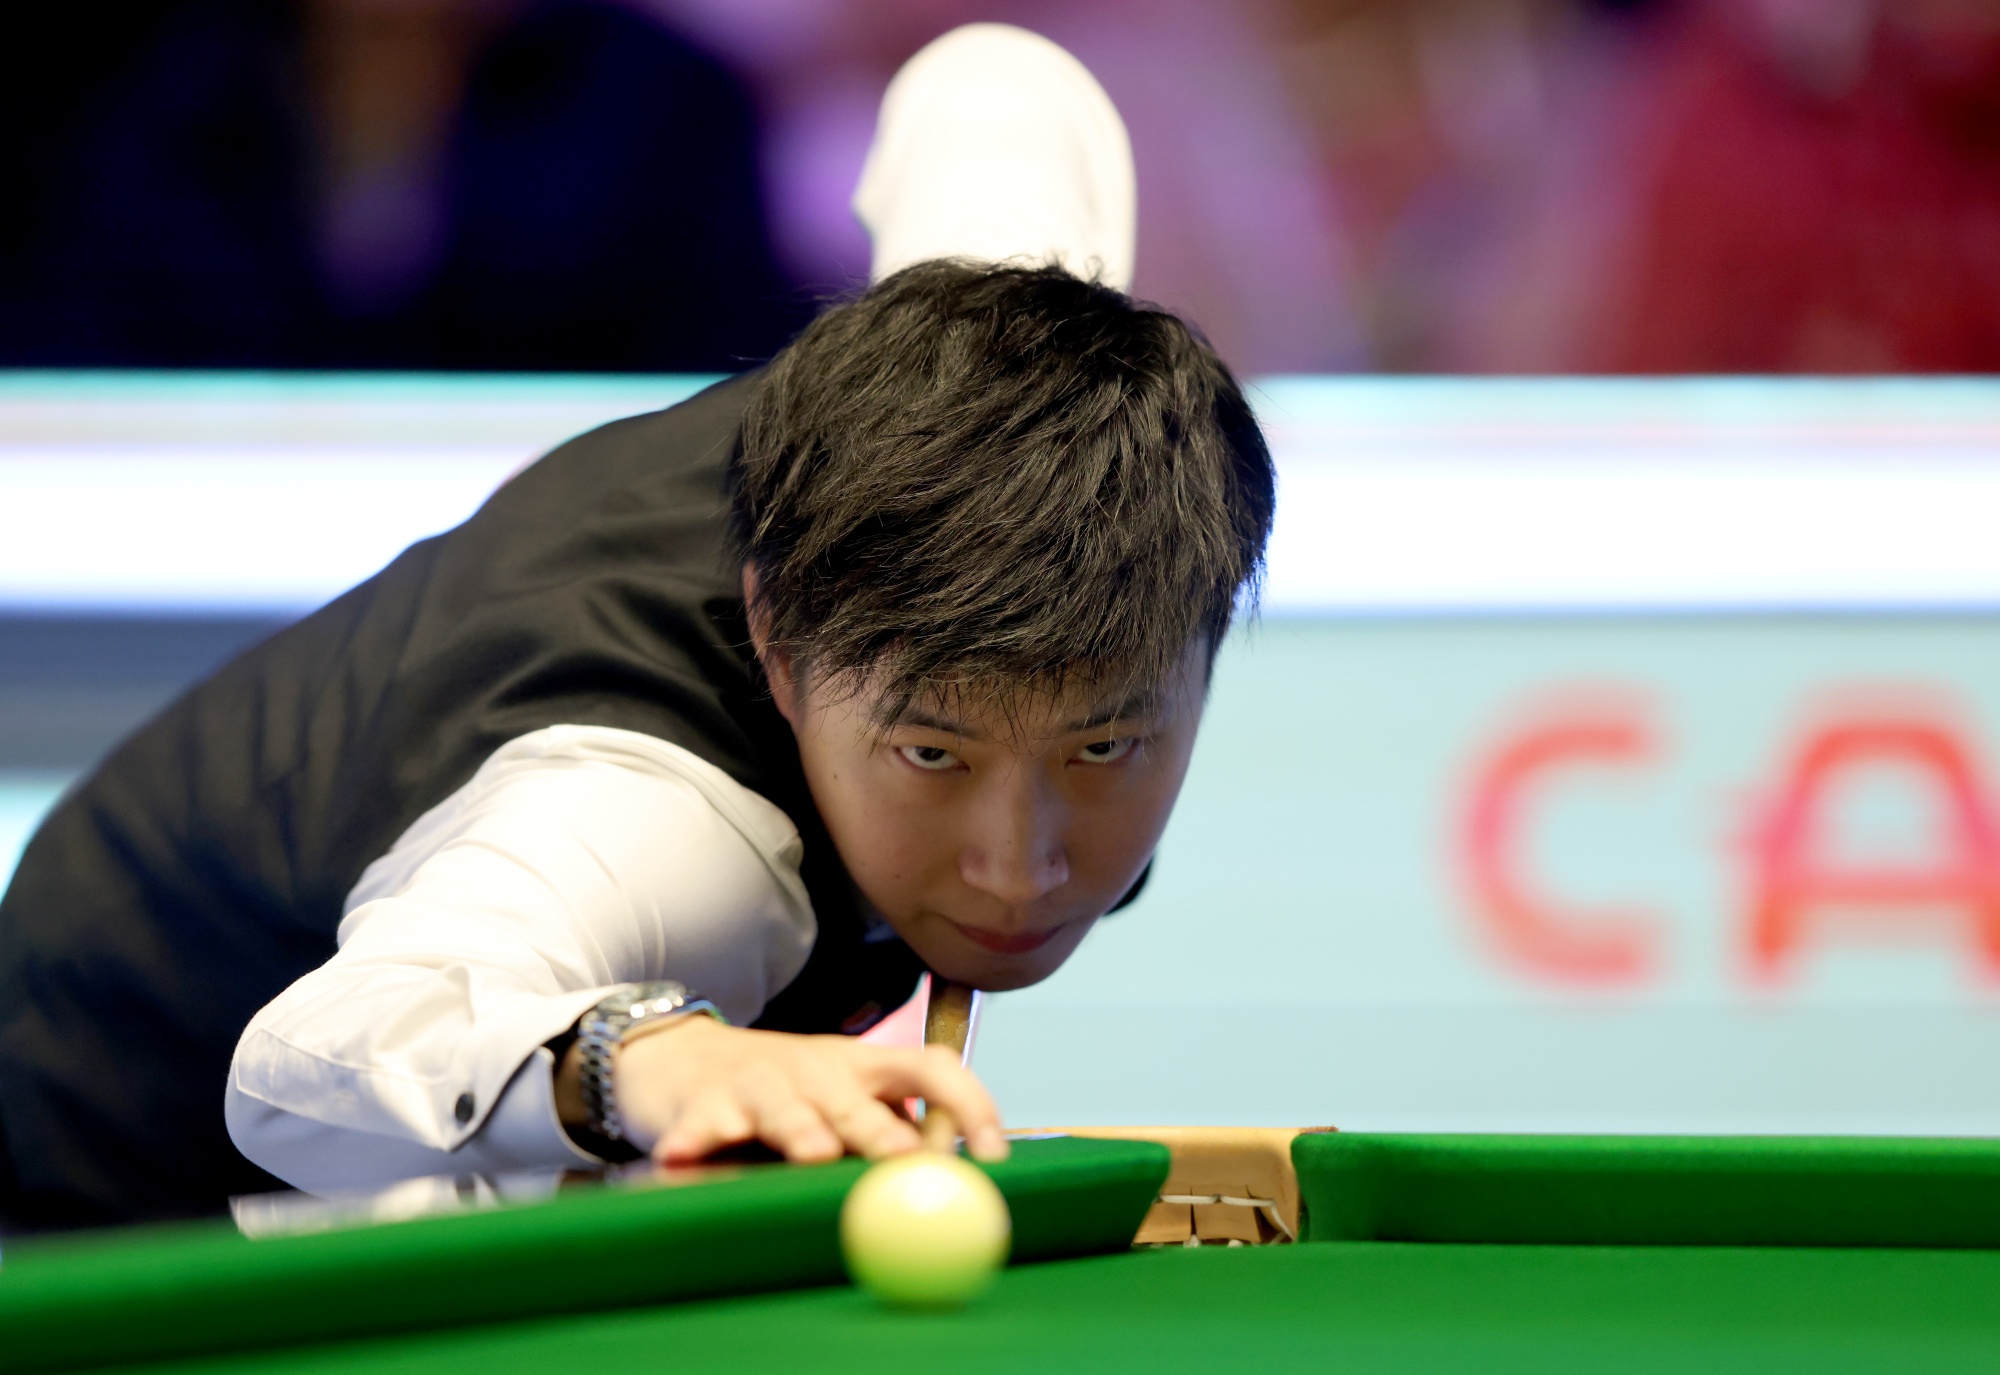 Snooker Former UK Champion Zhao Xintong Suspended in Match-Fixing Probe